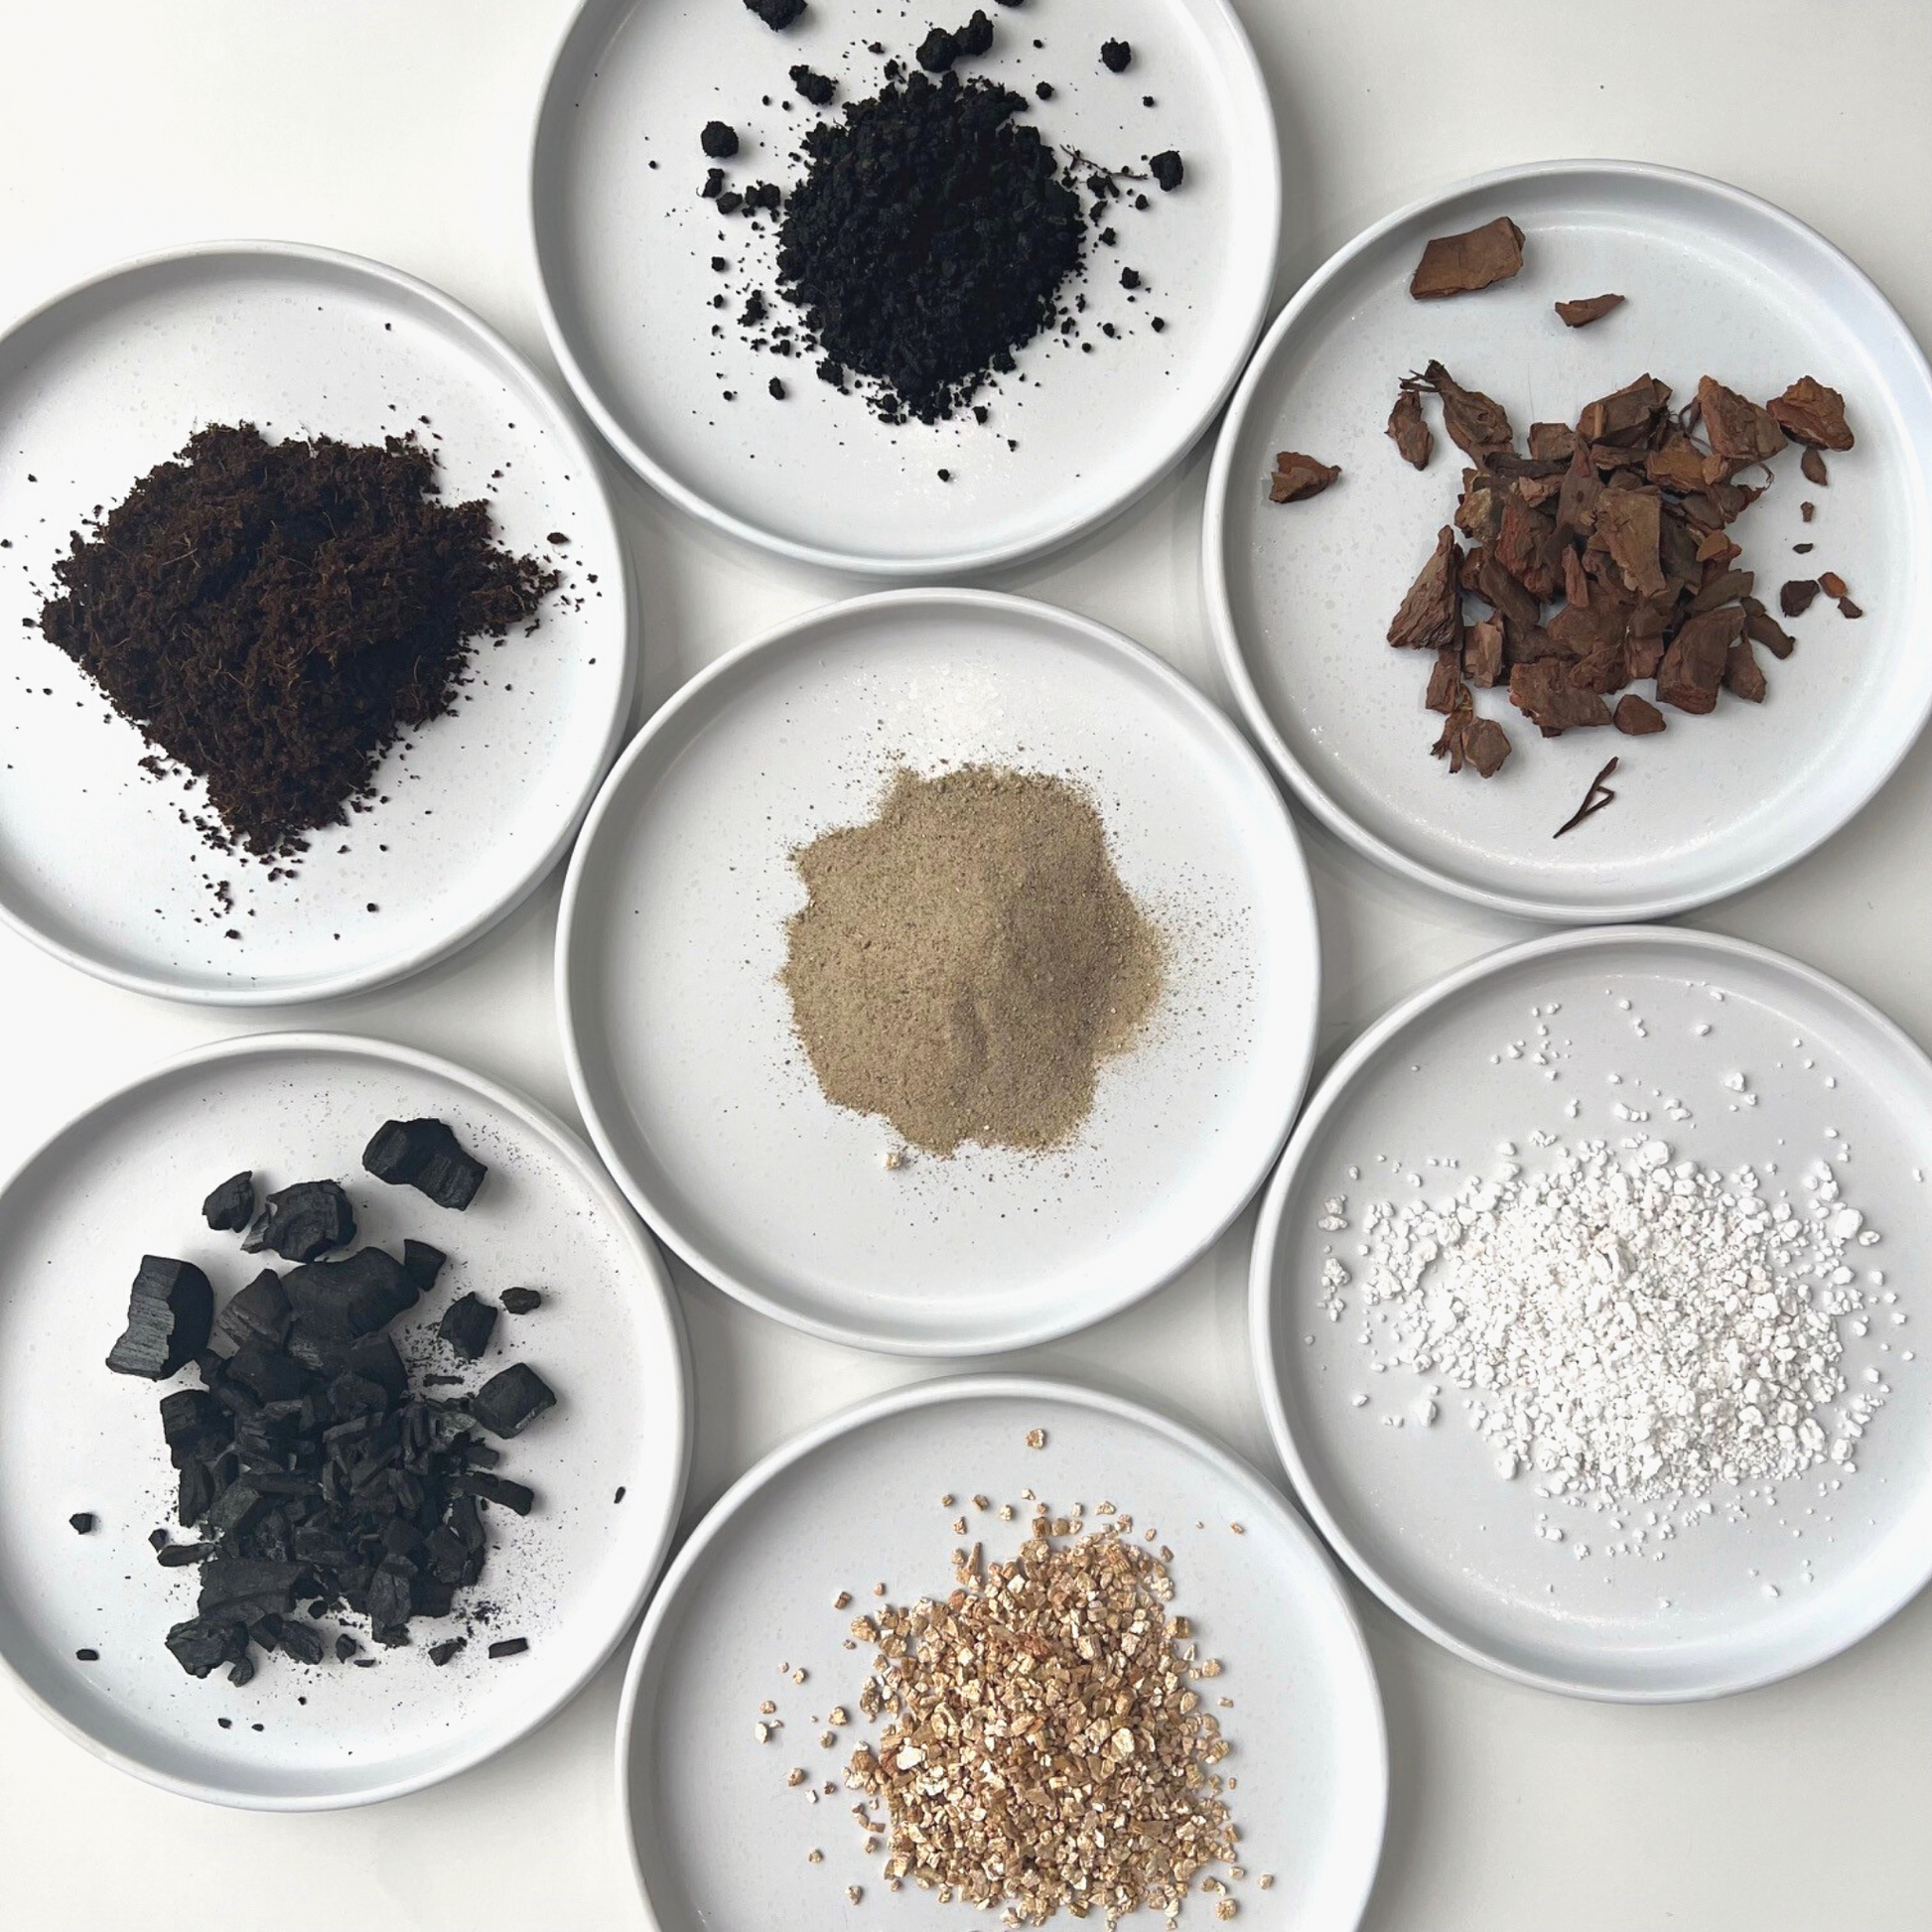 A ingredient makeup of Birdy's Plants Premium Ficus Soil Mix including sand, activated horticultural charcoal, orchid bark, vermiculite, coarse perlite, worm castings, and coco coir.